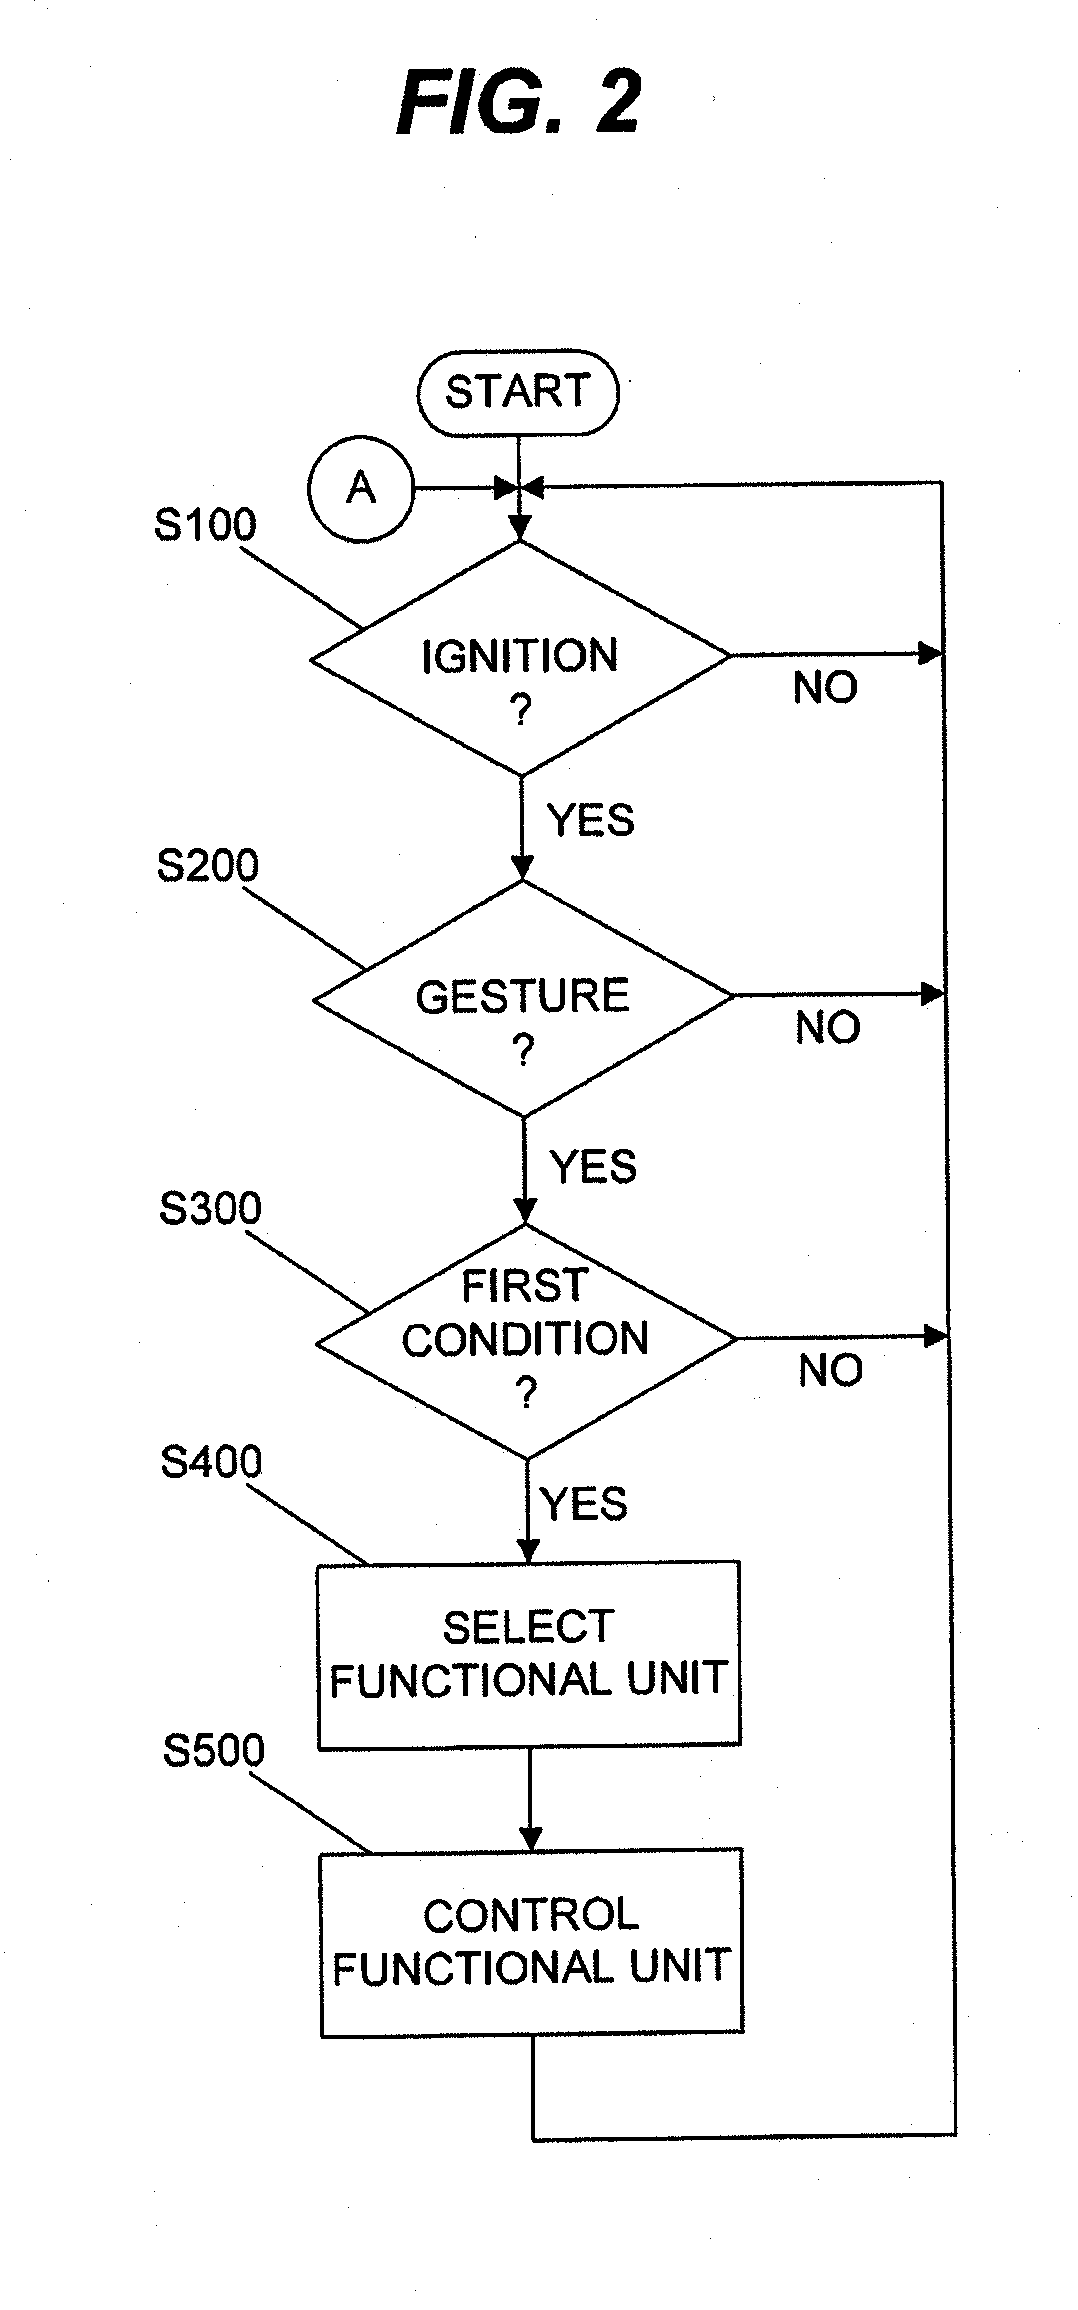 Method, Device and Computer Program Product for Controlling a Functional Unit of a Vehicle